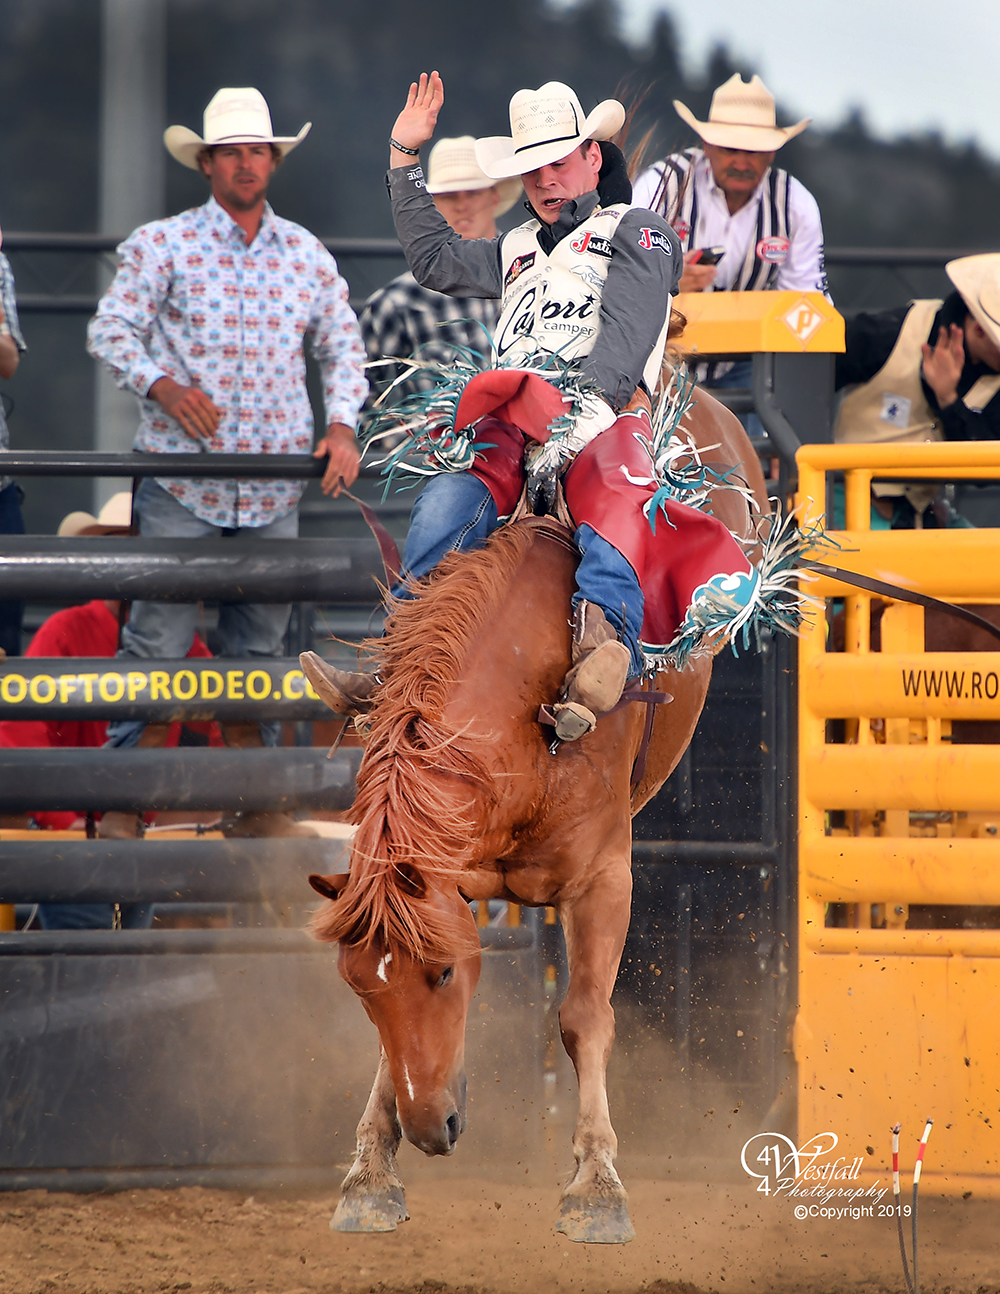 Tim O'Connell rides Cervi's San Luis for 87 points to take the bareback riding lead at the Rooftop Rodeo. (PHOTO BY GREG WESTFALL)